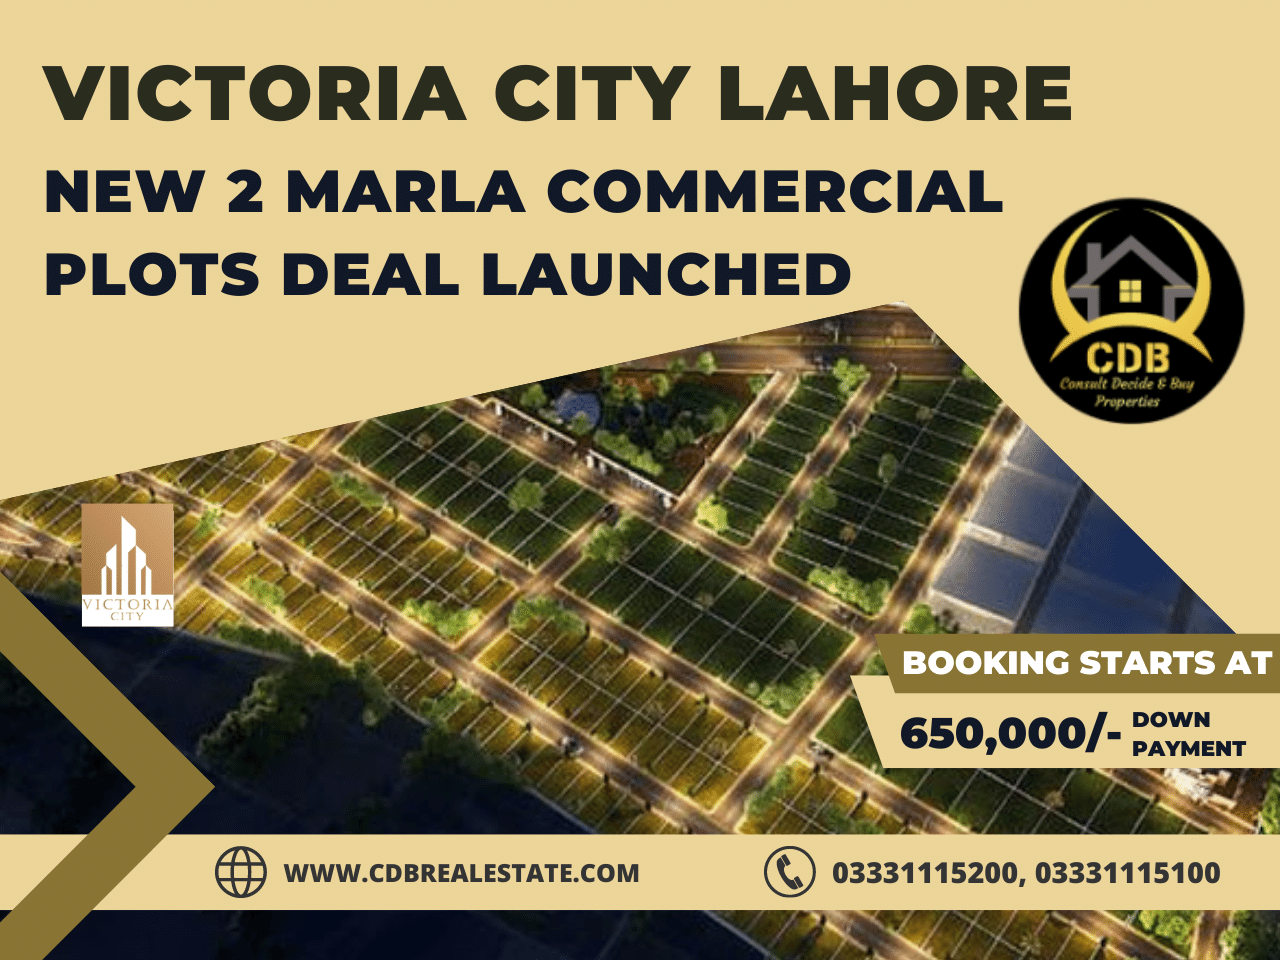 Victoria City Lahore Launched A New 2 Marla Commercial Plots Deal